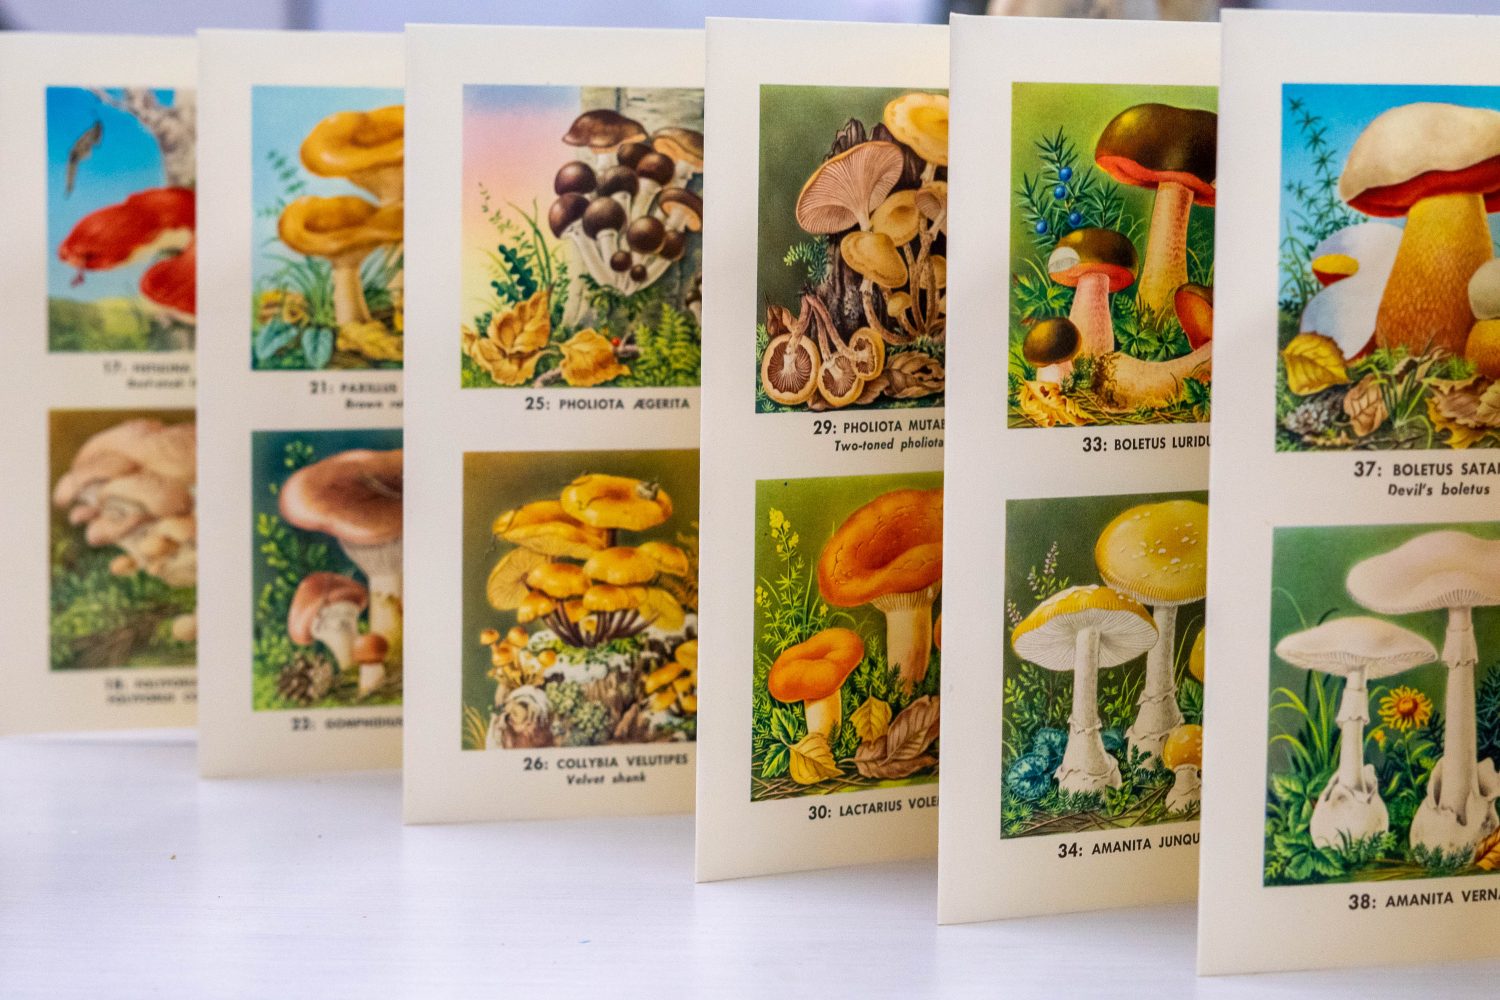 Fold out book with illustrations of many different types of mushrooms